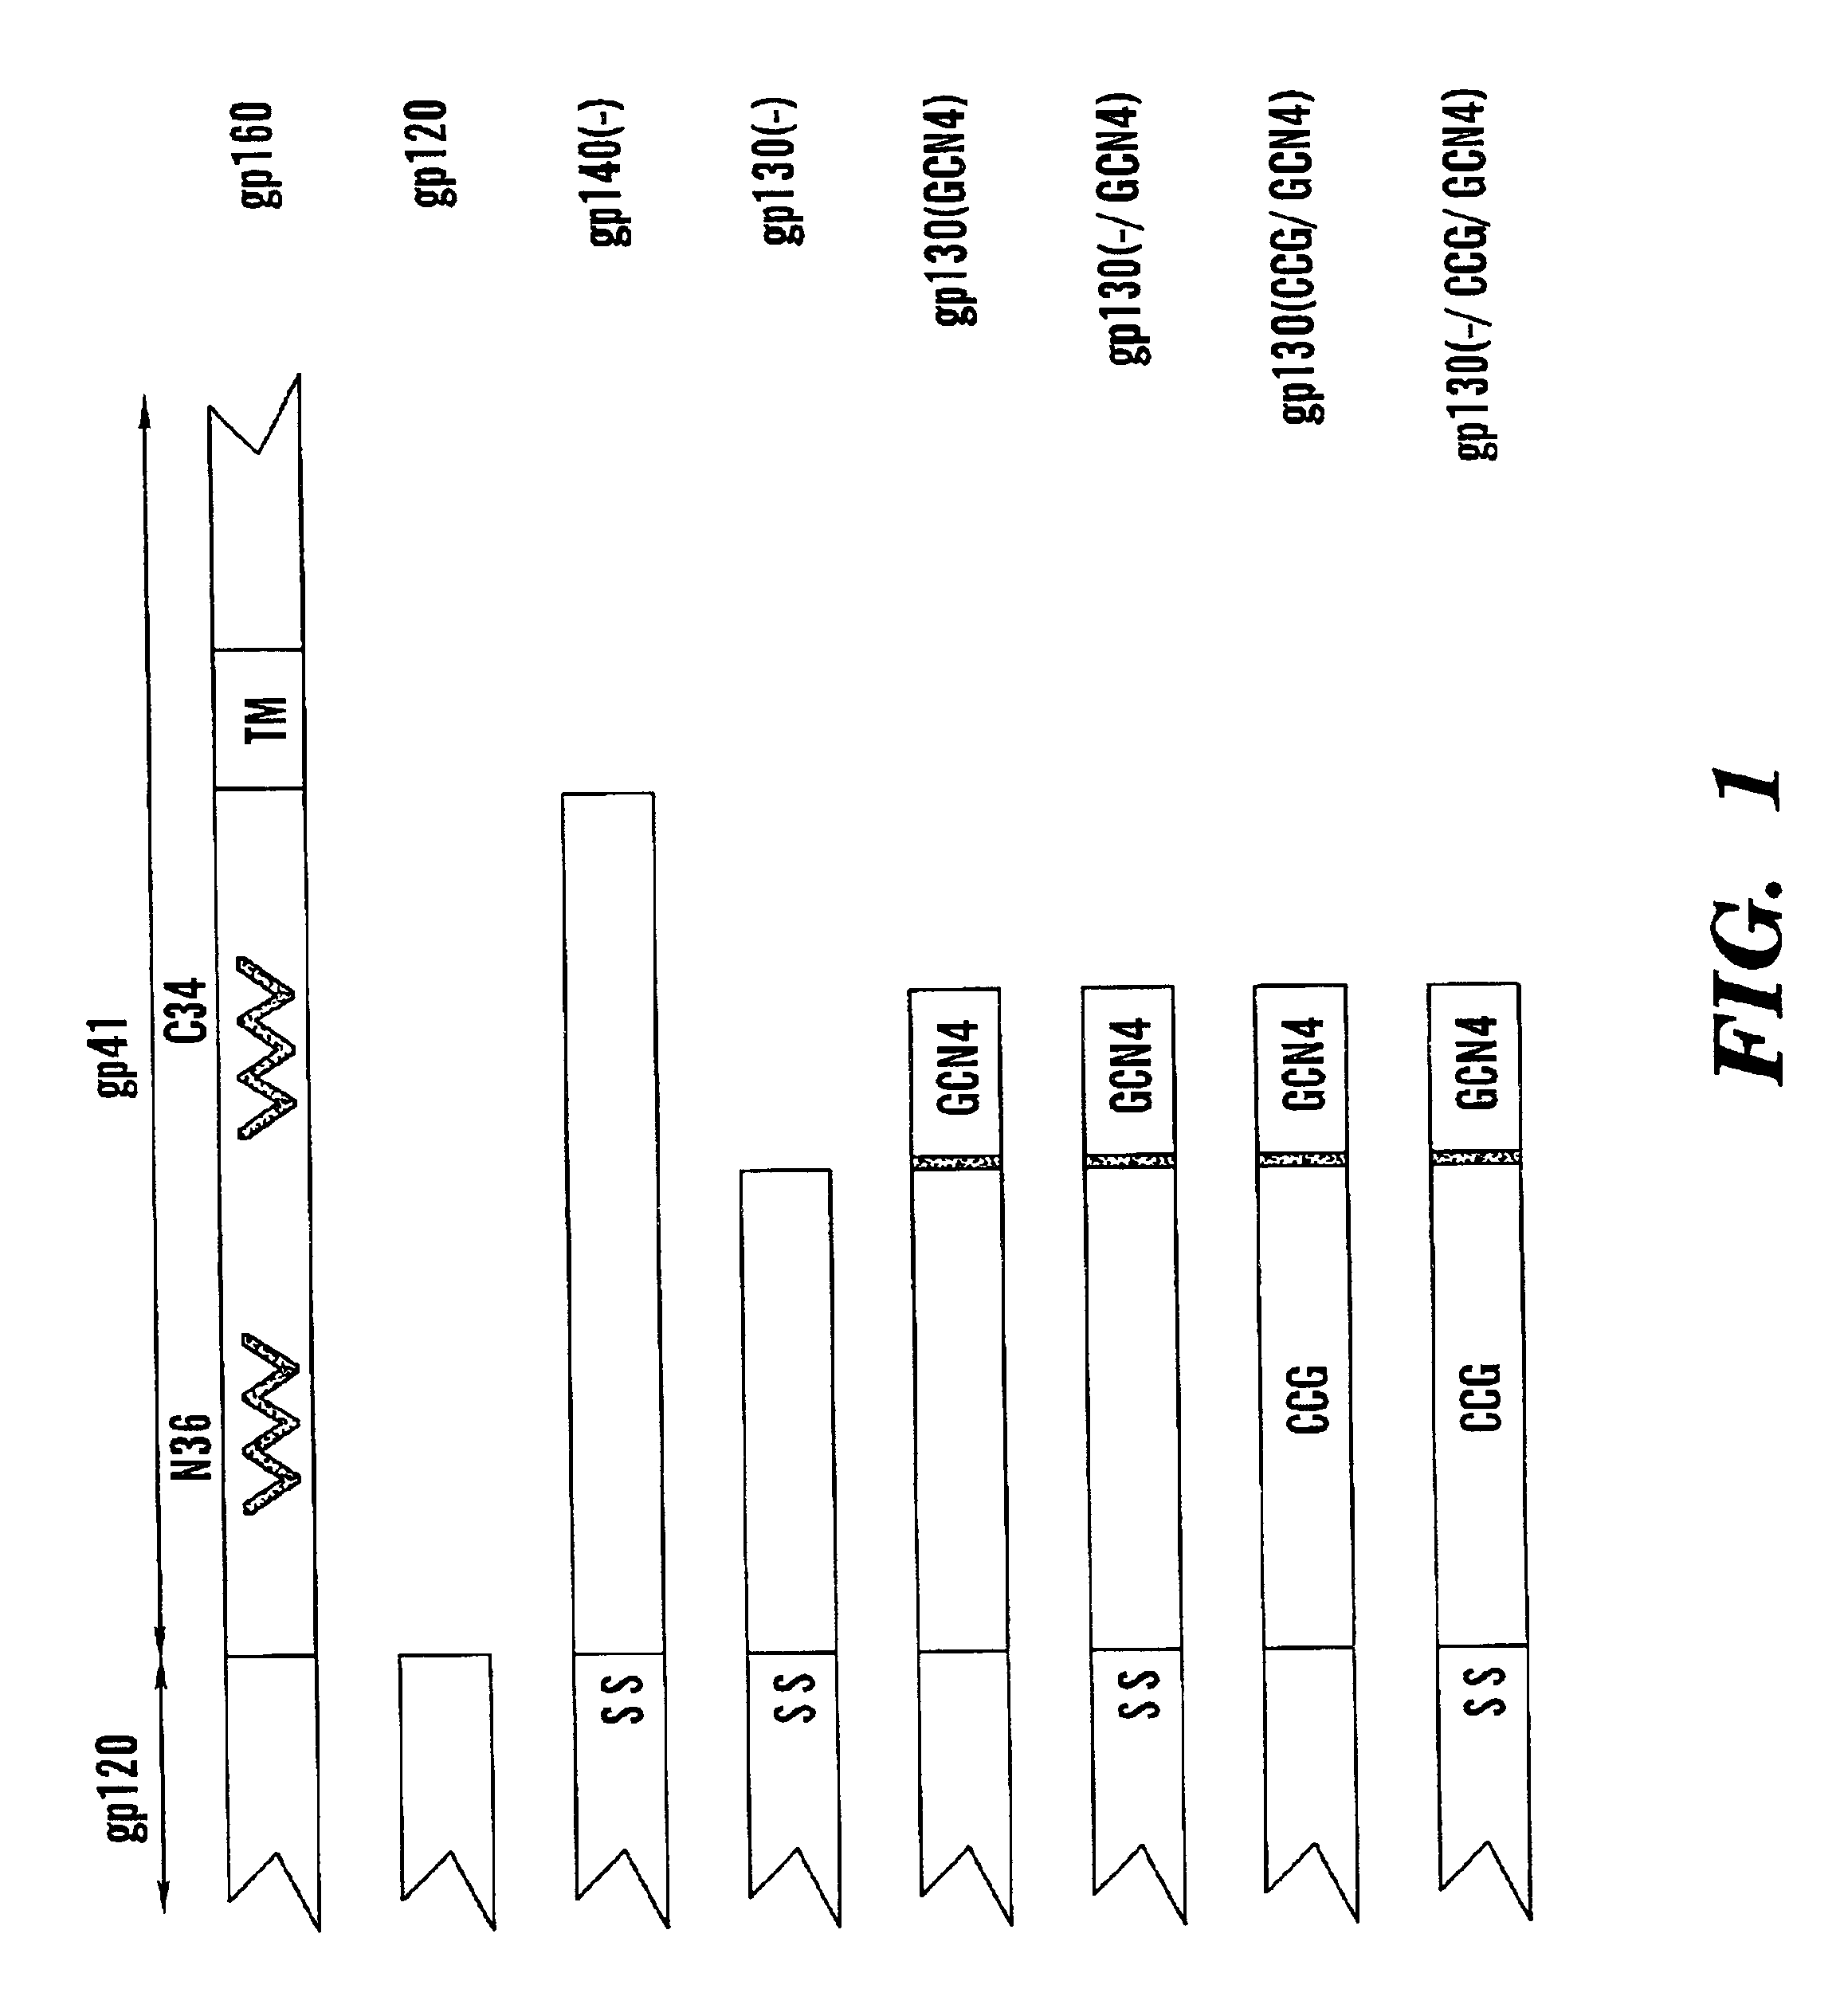 Stabilized soluble glycoprotein trimers